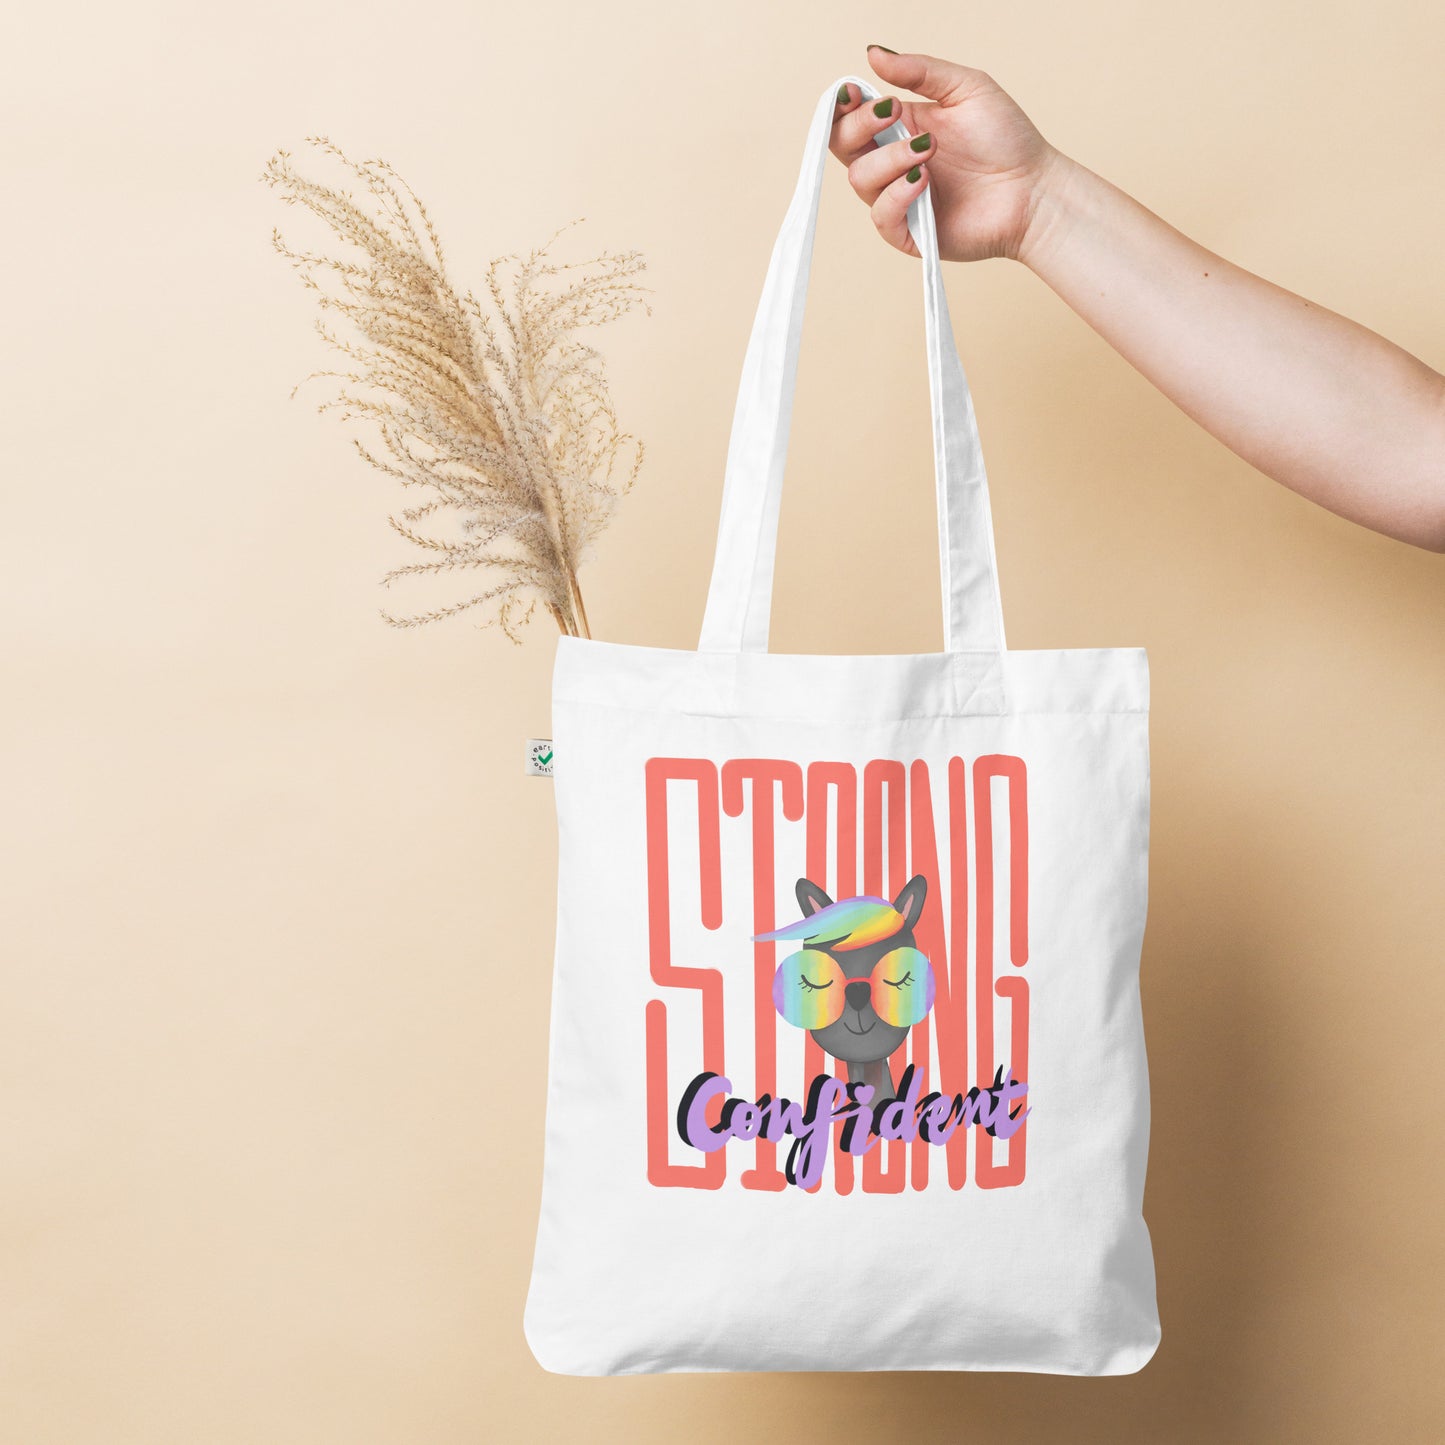 Strong Confident Organic Fashion Tote Bag